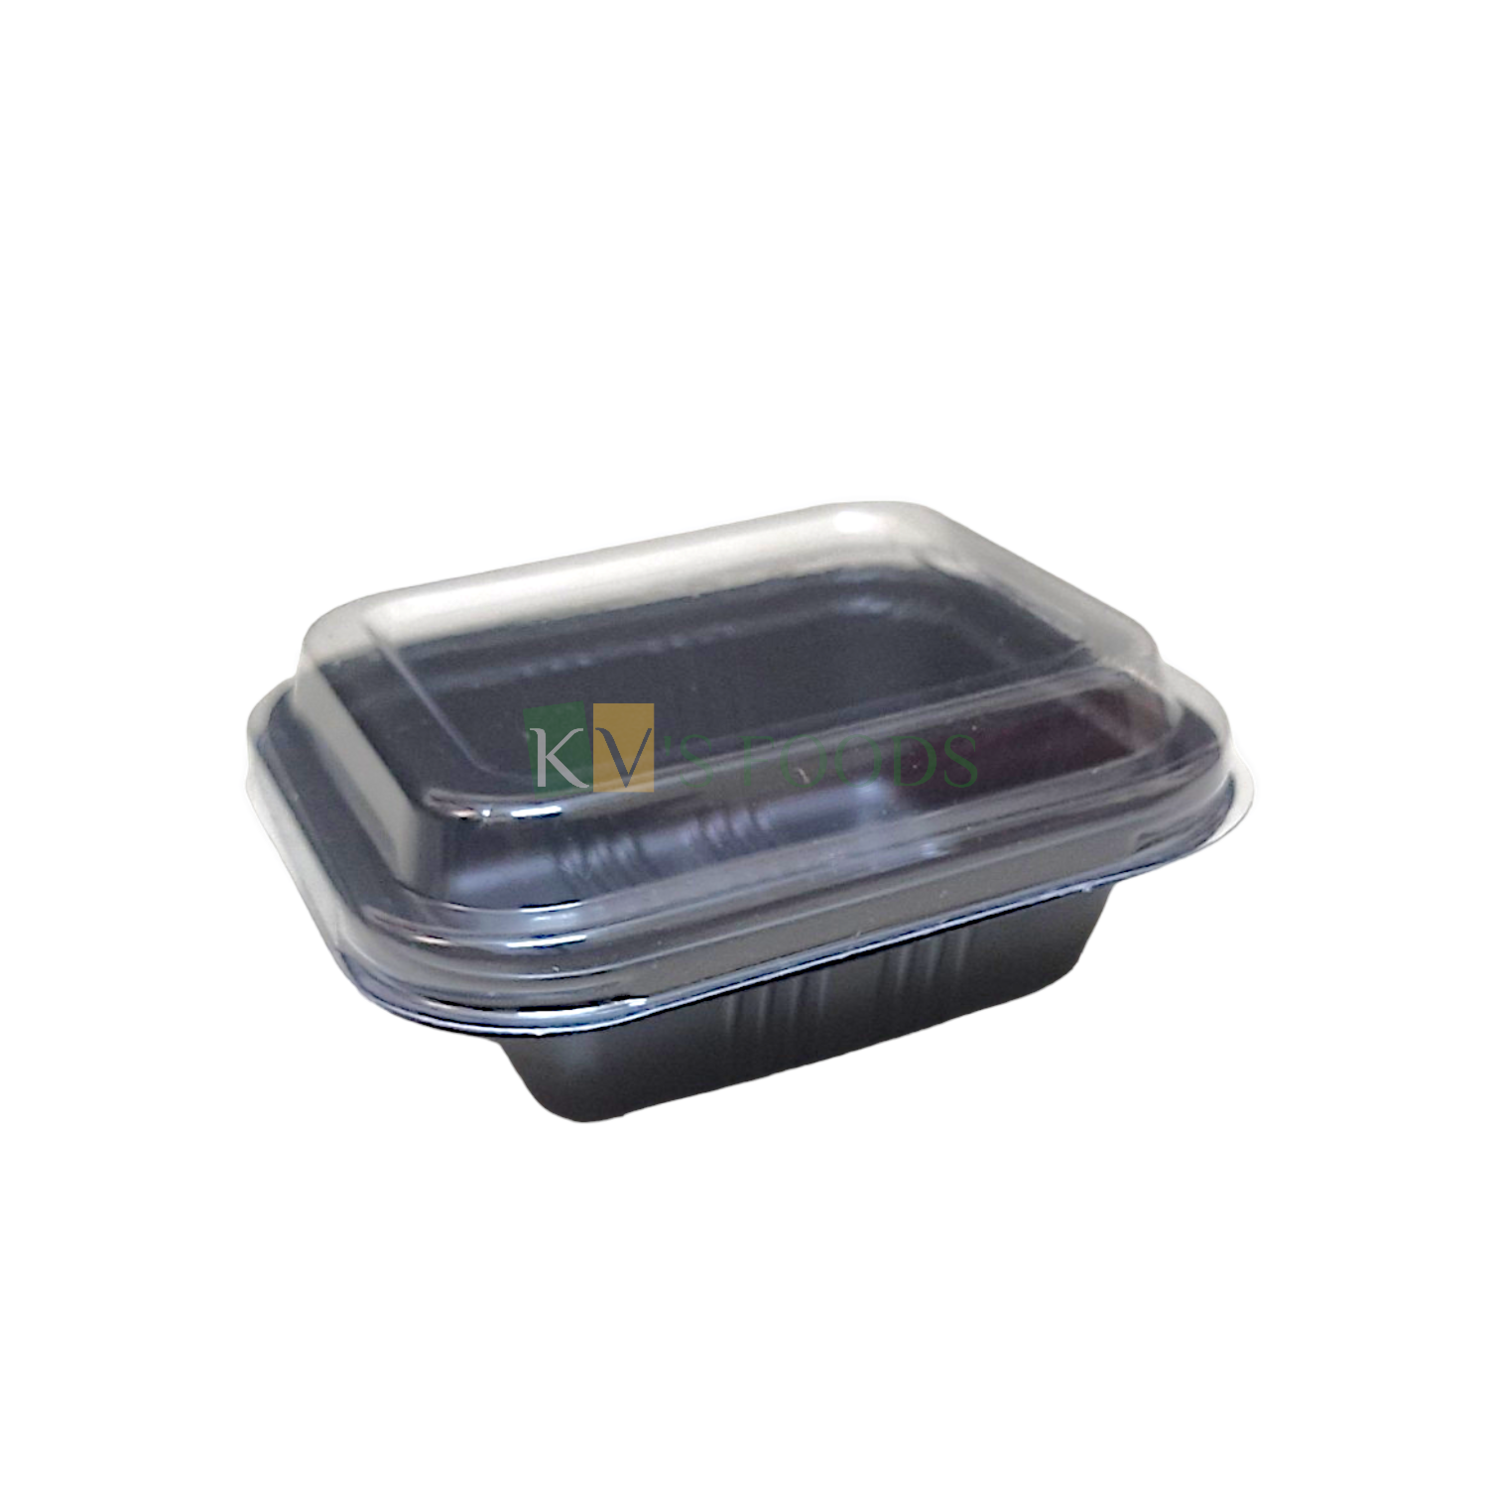 5 PCS Size 4.1 x 3.7 Inches Height 1.6 Inches Capacity ~120 ML Rectangle Small Black 1 Brownie Packaging Container with Flat Transparent Lid Bakery Accessories Deep Pastry Food Box